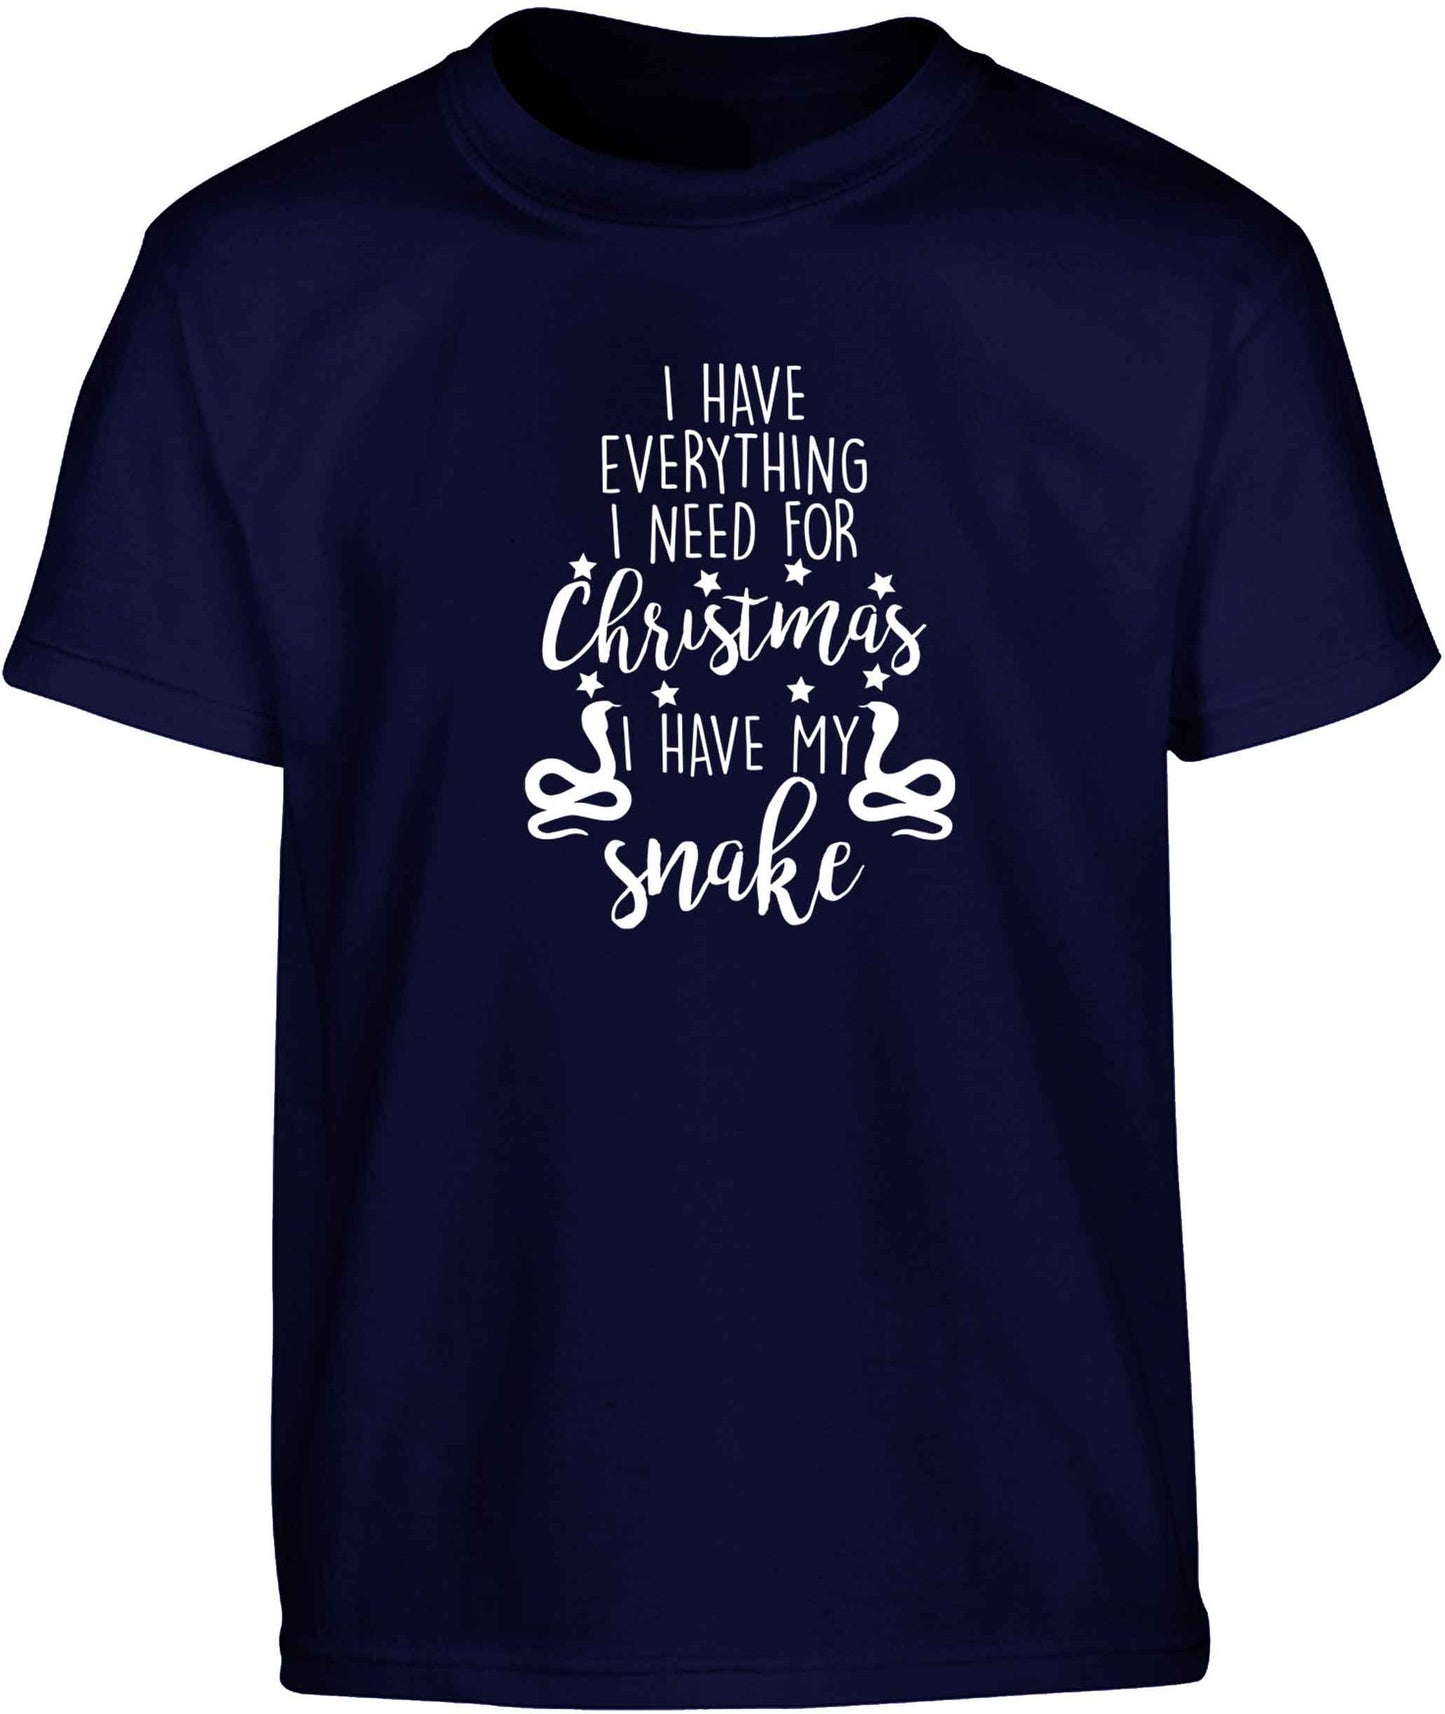 I have everything I need for Christmas I have my snake Children's navy Tshirt 12-13 Years